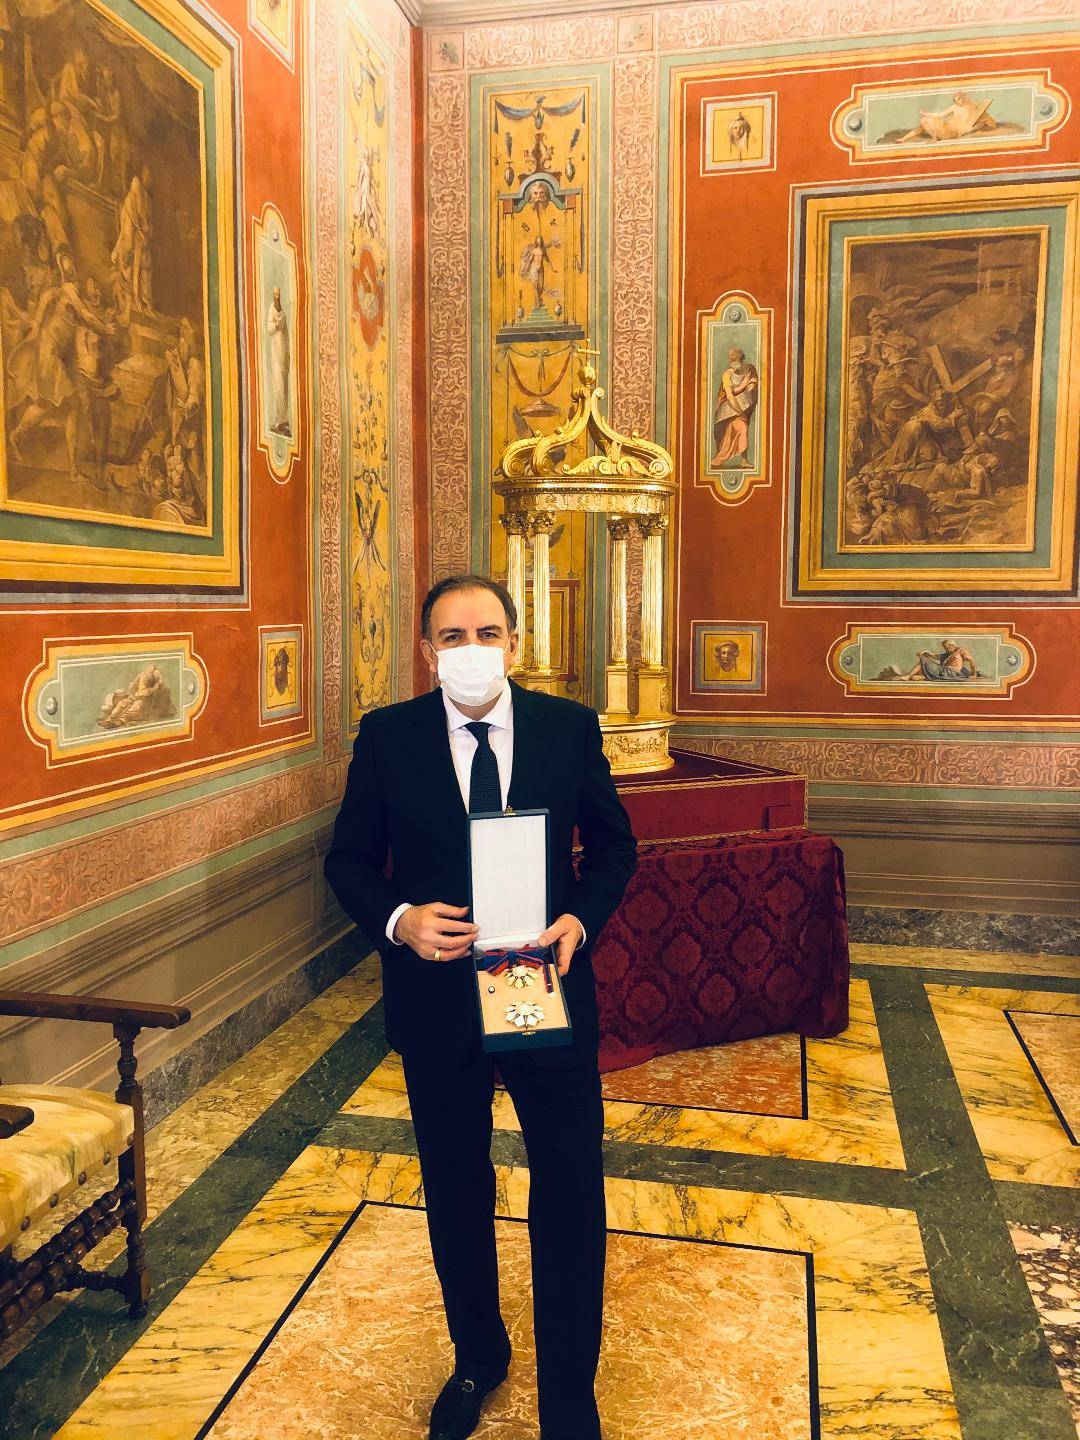 Ambassador of Armenia received the title Knights of Grand Cross Order by Pope Francis